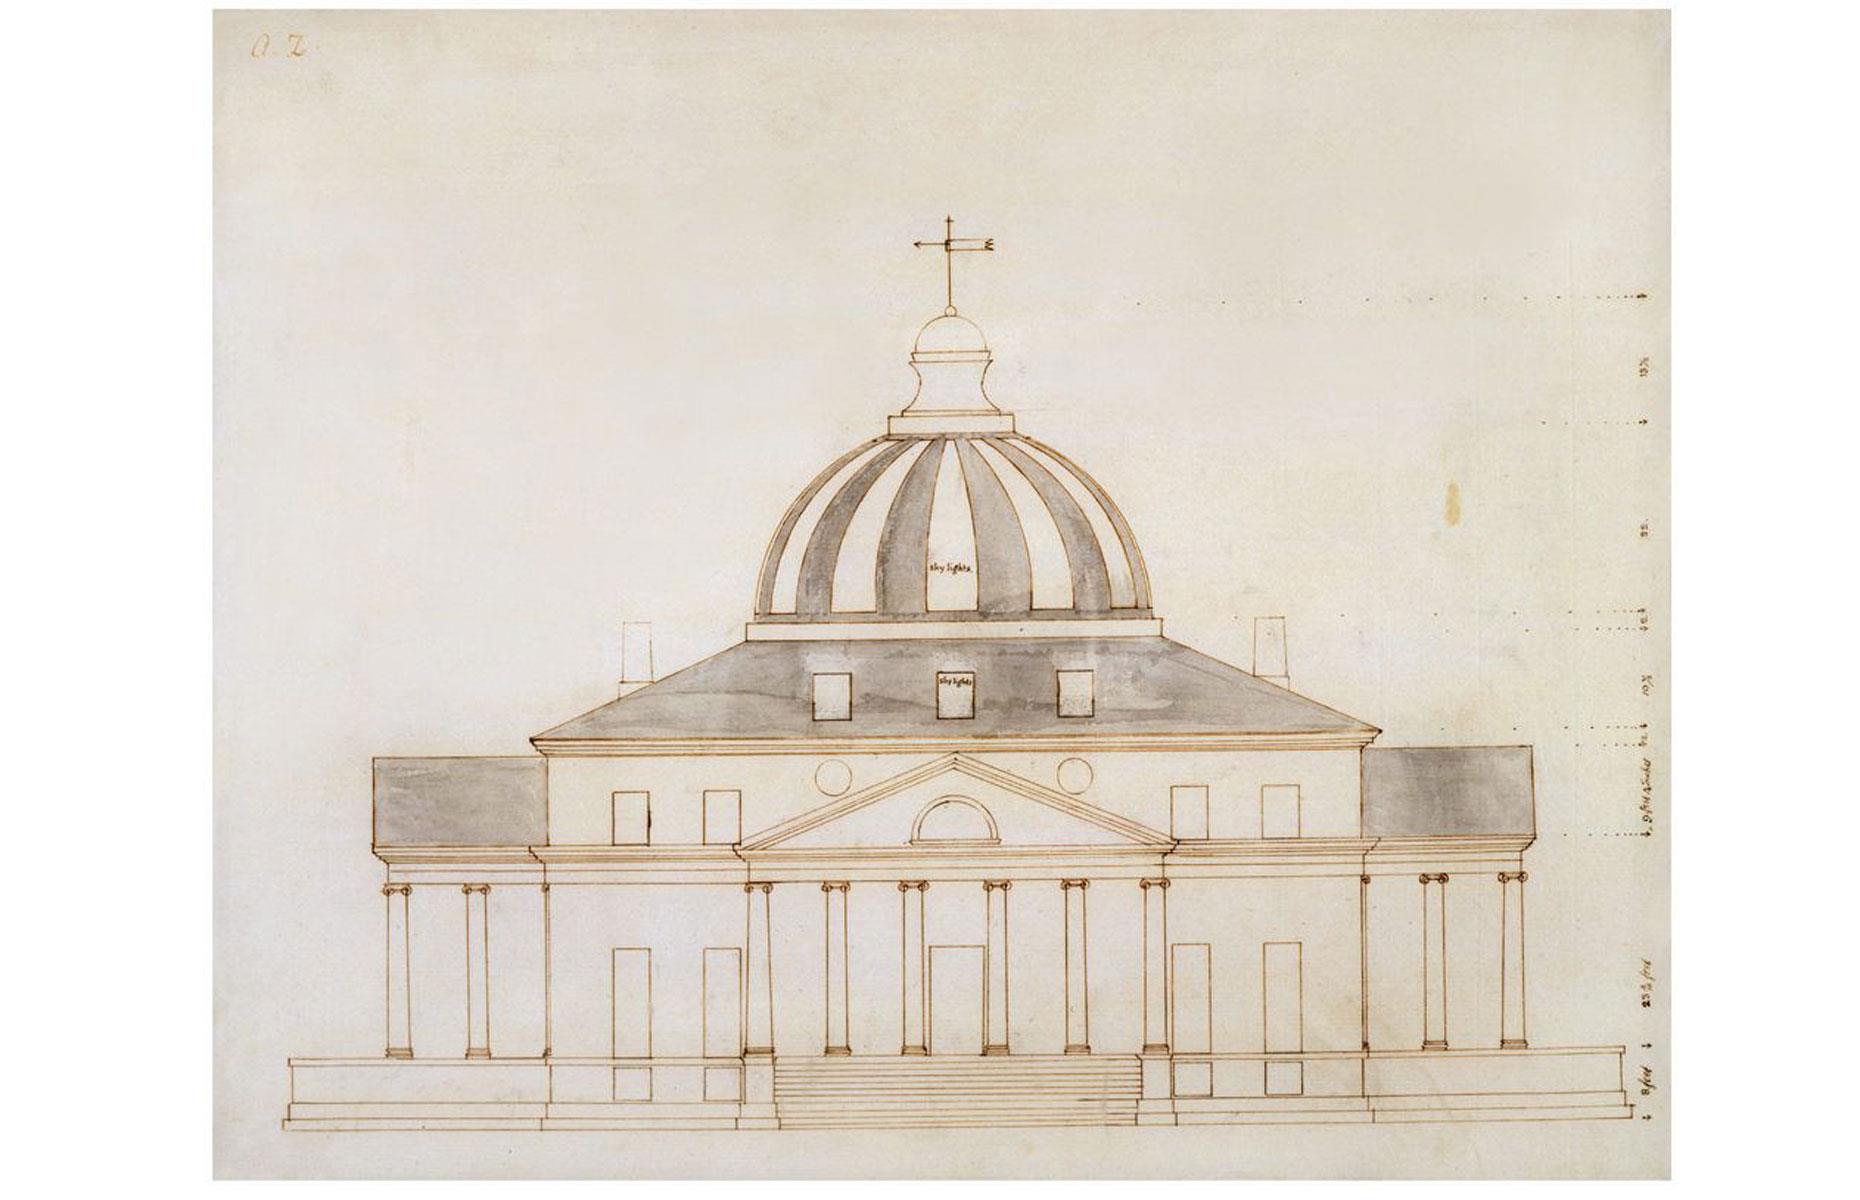 <p>The White House might very well have looked like this. The domed design, which is said to have been submitted anonymously by Jefferson via Virginia builder John Collins, was admired by Washington and nabbed second place in the competition.  </p>  <p><strong>Now read about the <a href="https://www.lovemoney.com/galleries/92147/megaprojects-that-changed-america-forever?page=1">megaprojects that changed America forever</a></strong></p>